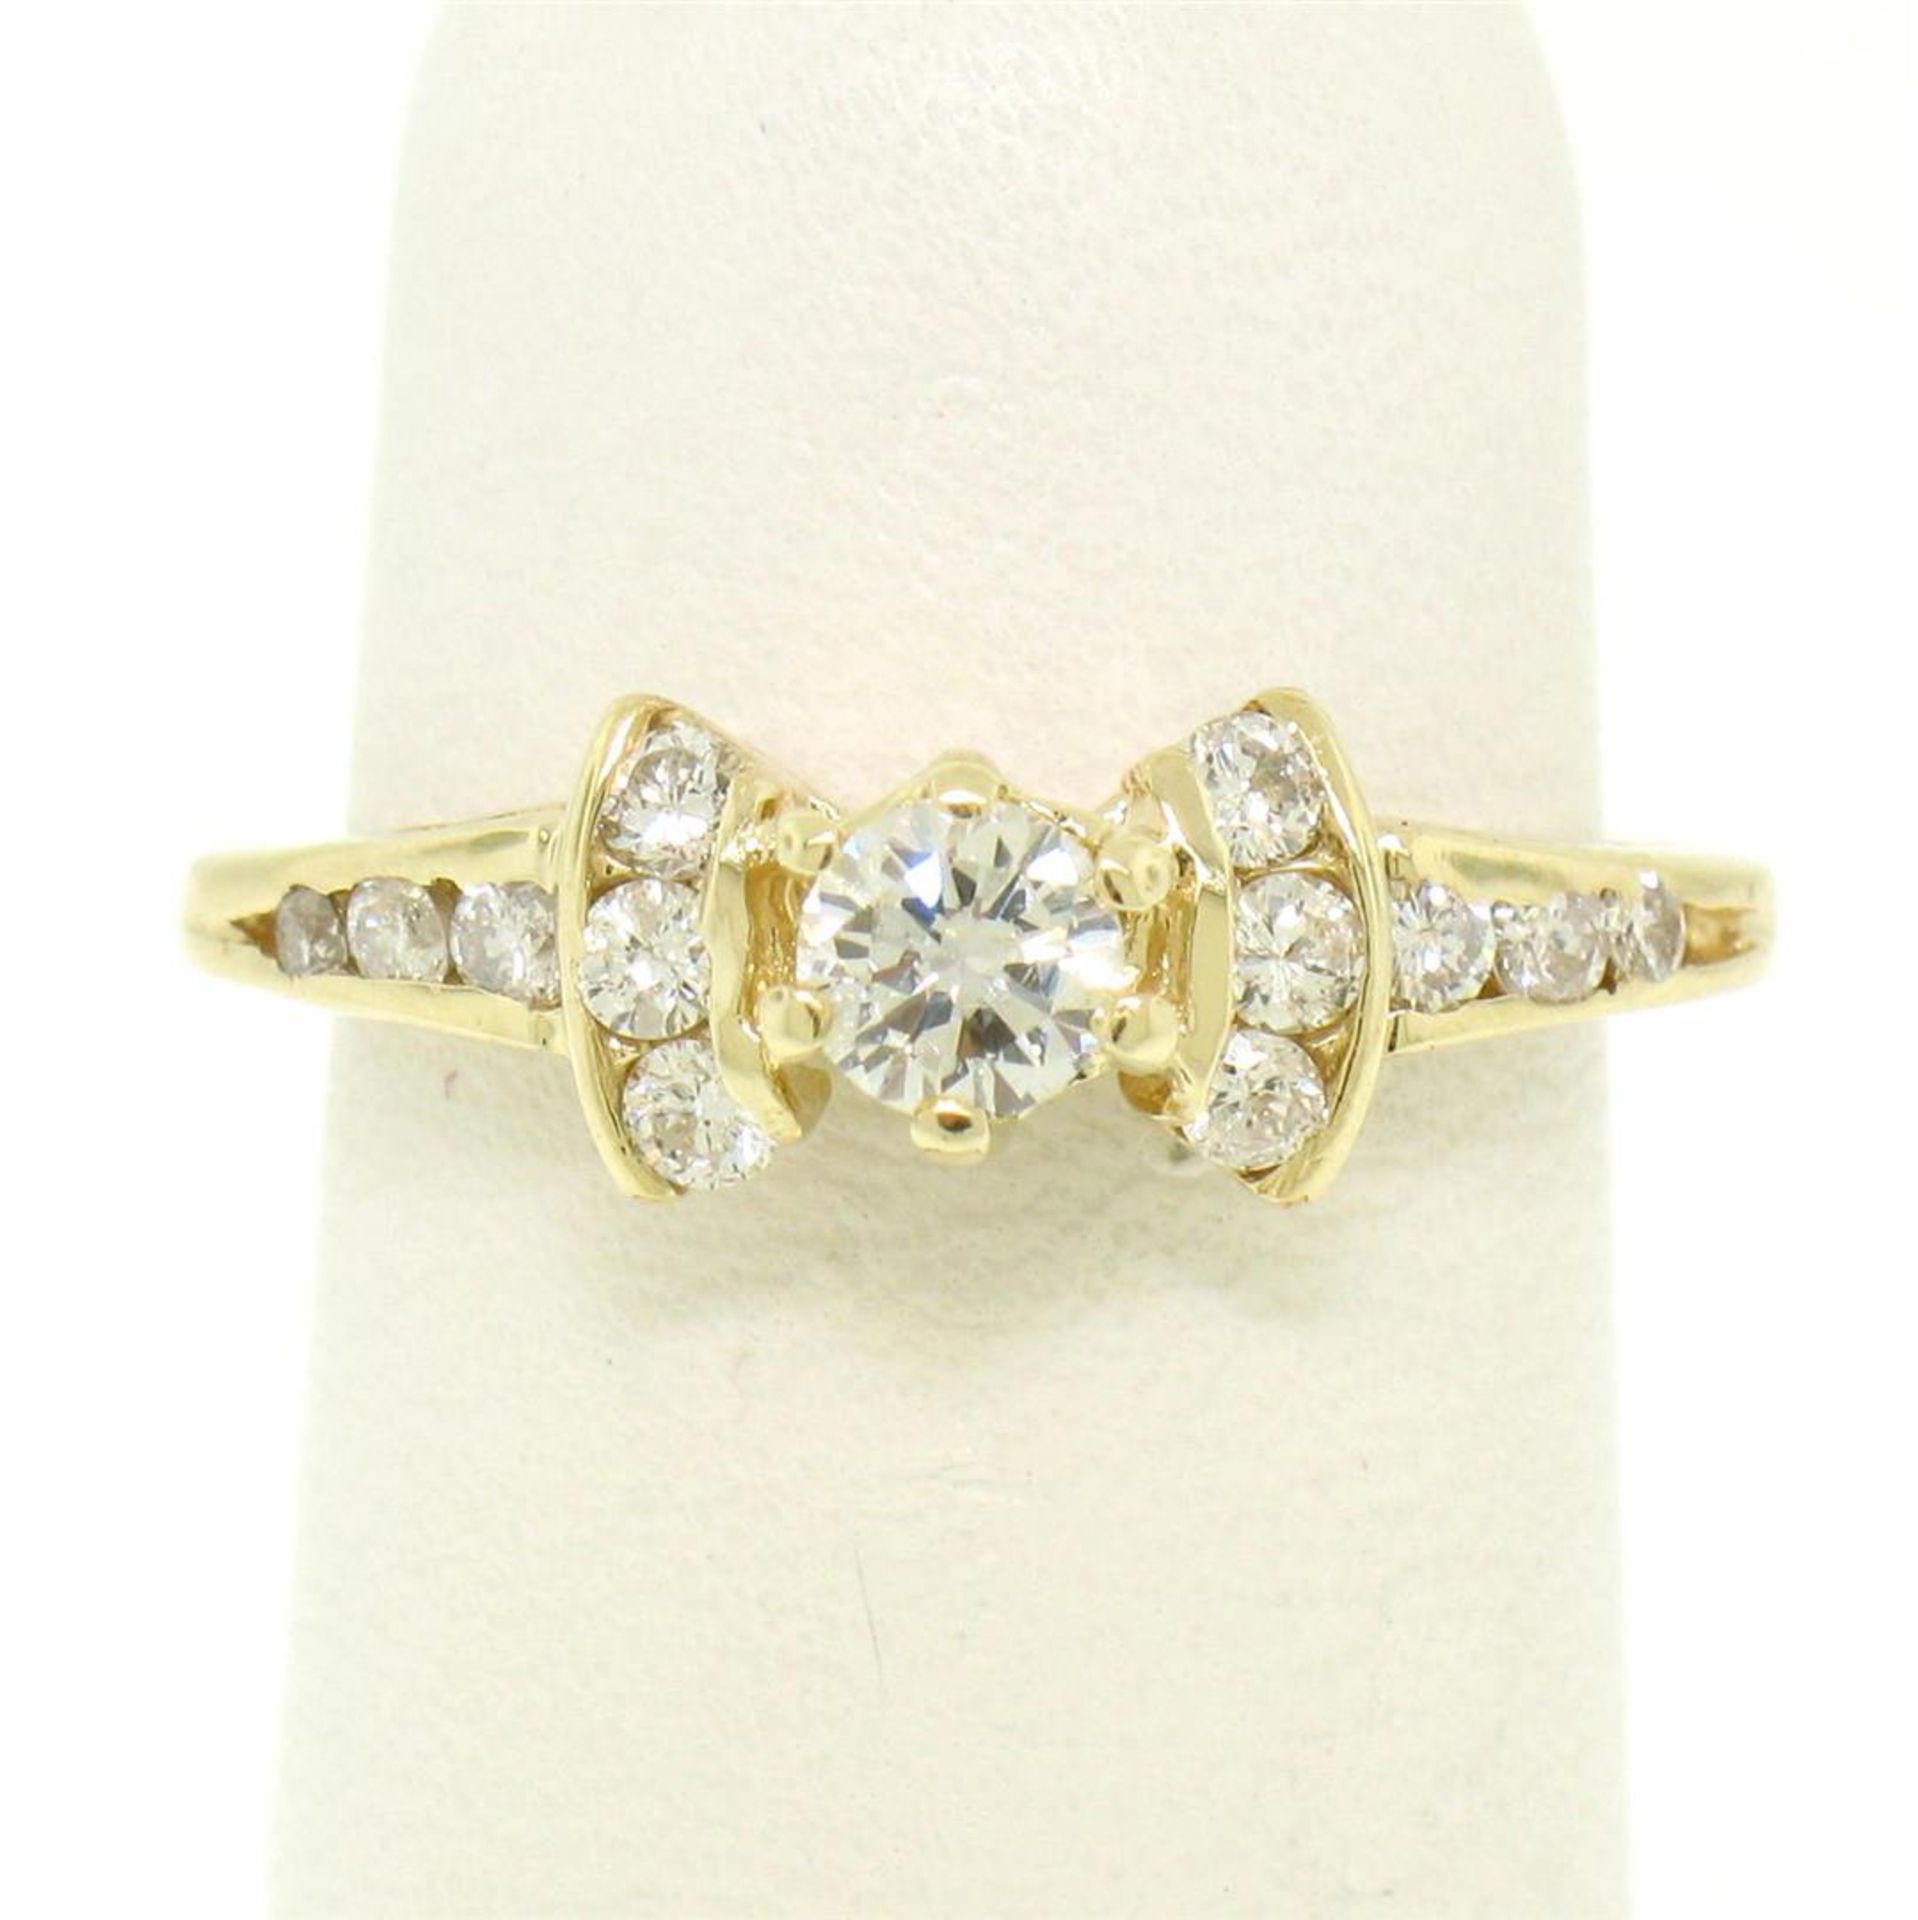 14k Yellow Gold Petite 0.42 ctw Round Diamond Engagement Ring w/ Channel Accents - Image 4 of 8